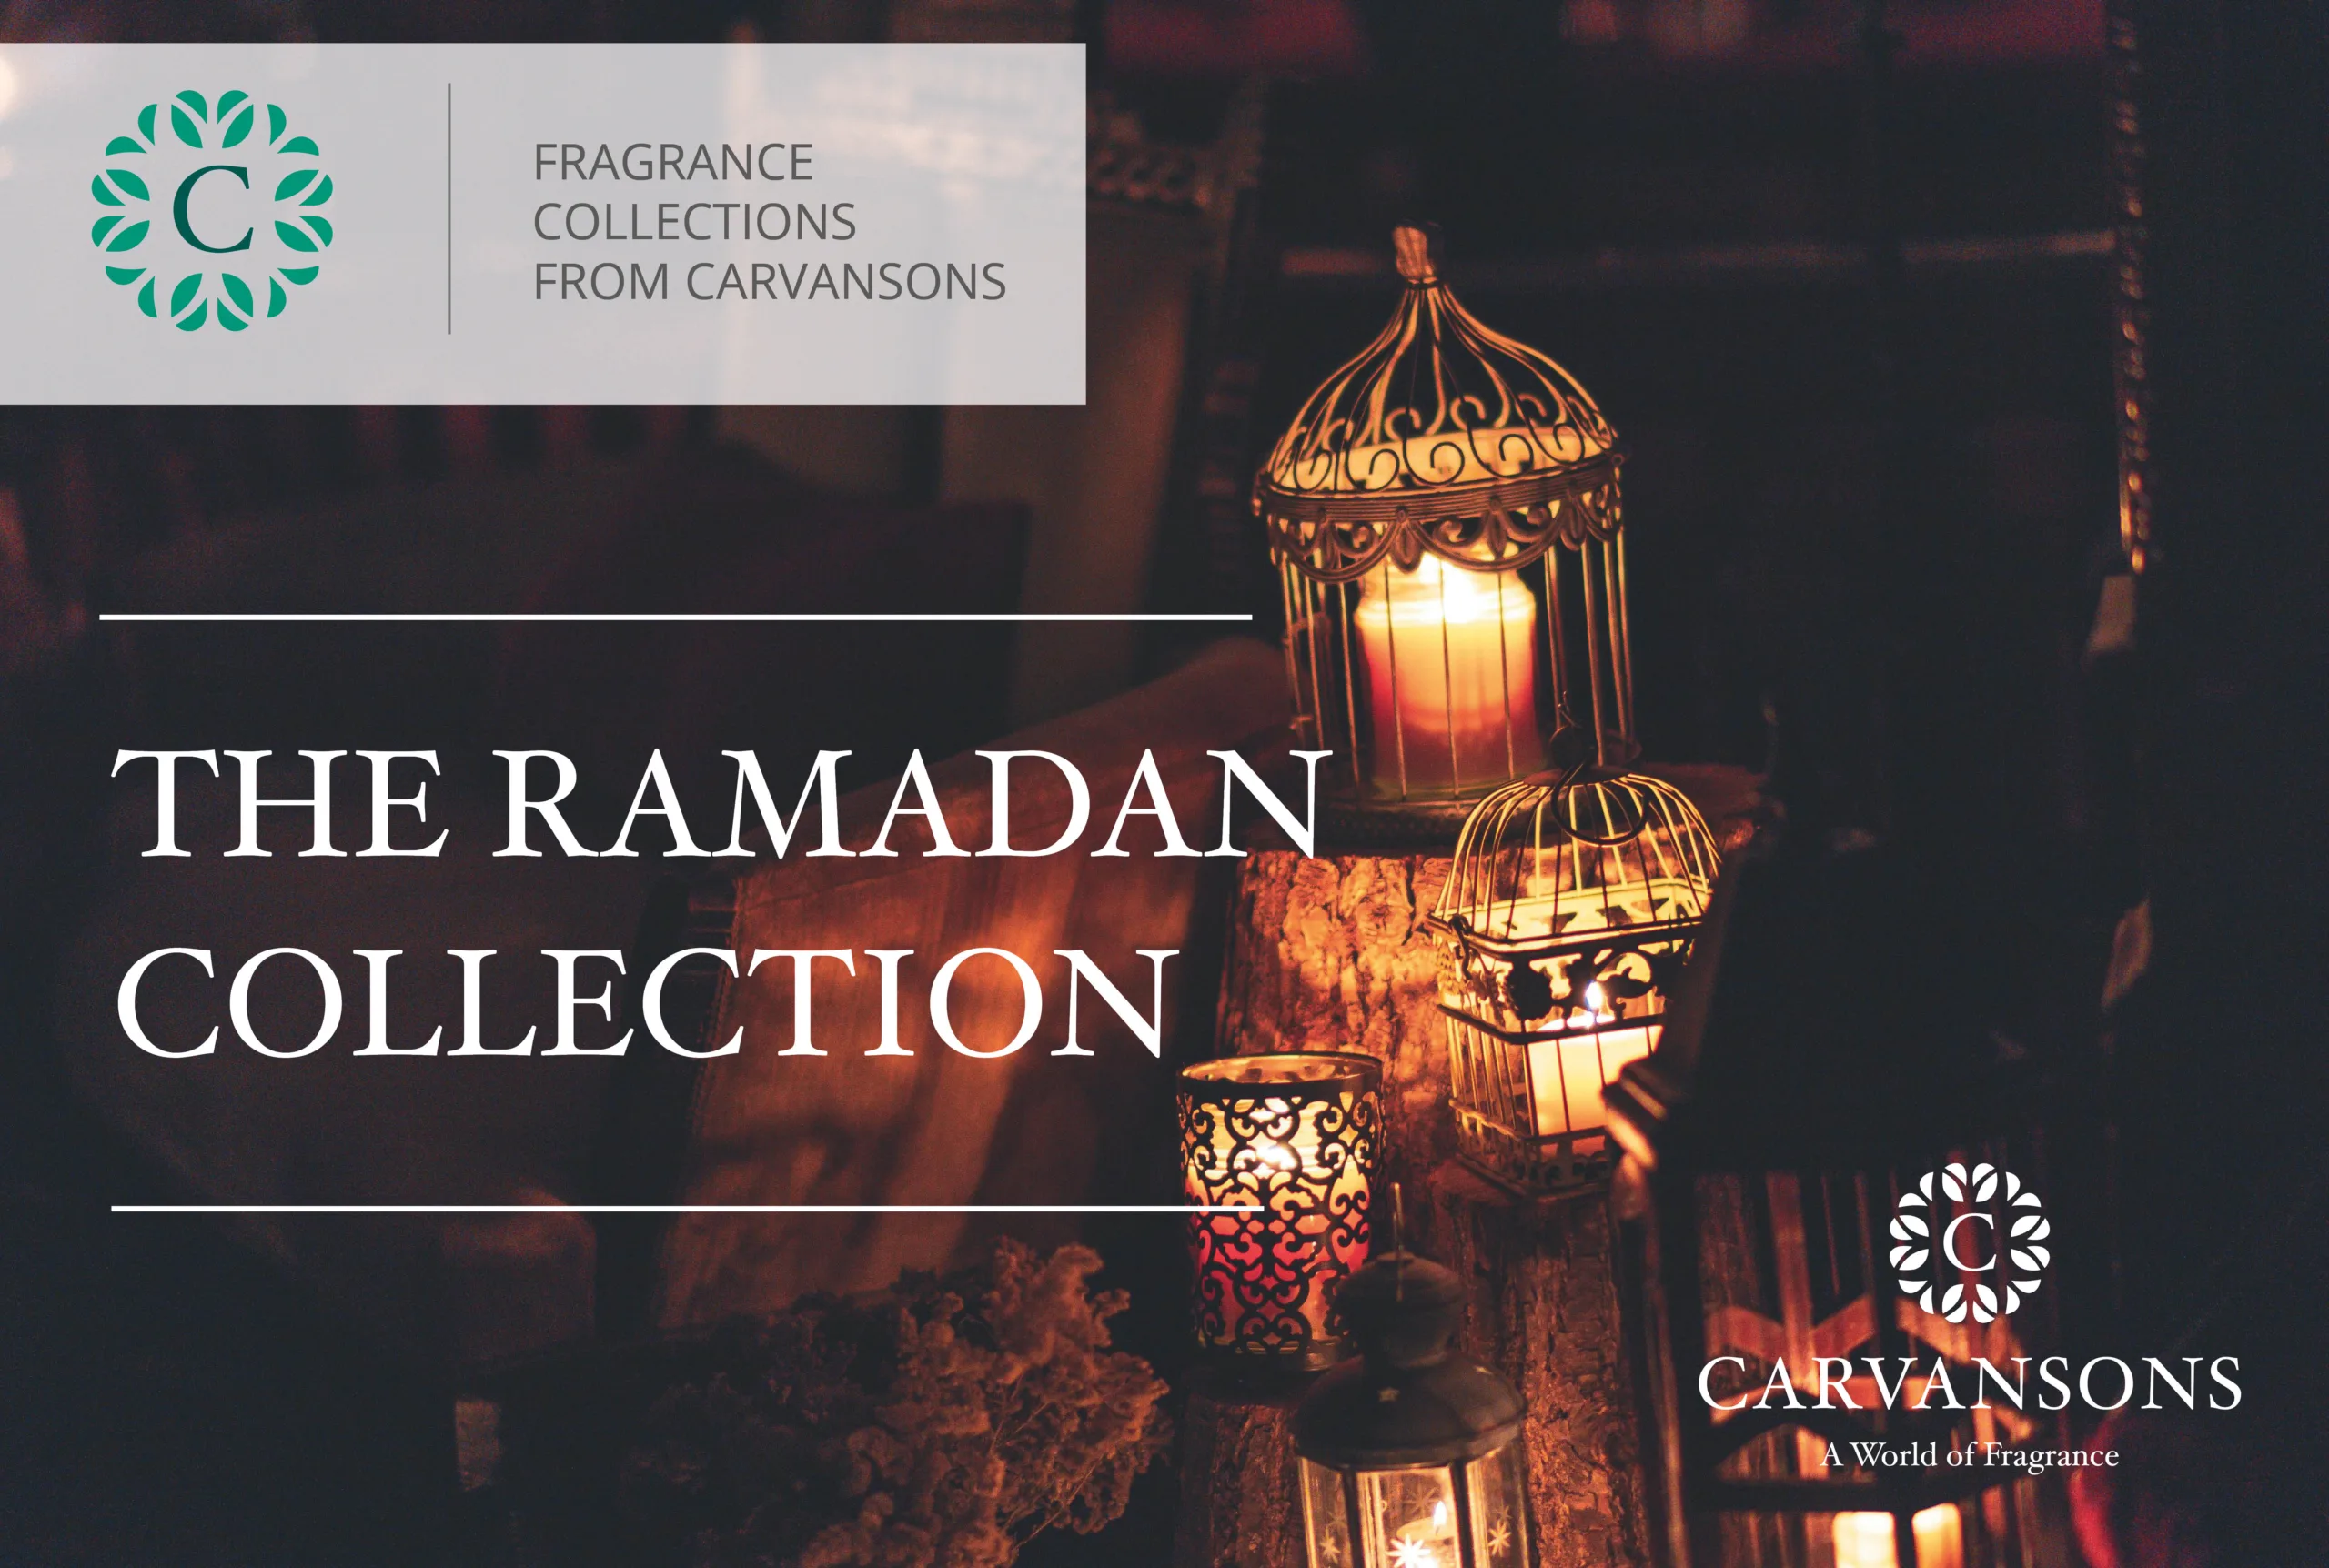 collections - RAMADAN FRAGRANCE COLLECTION